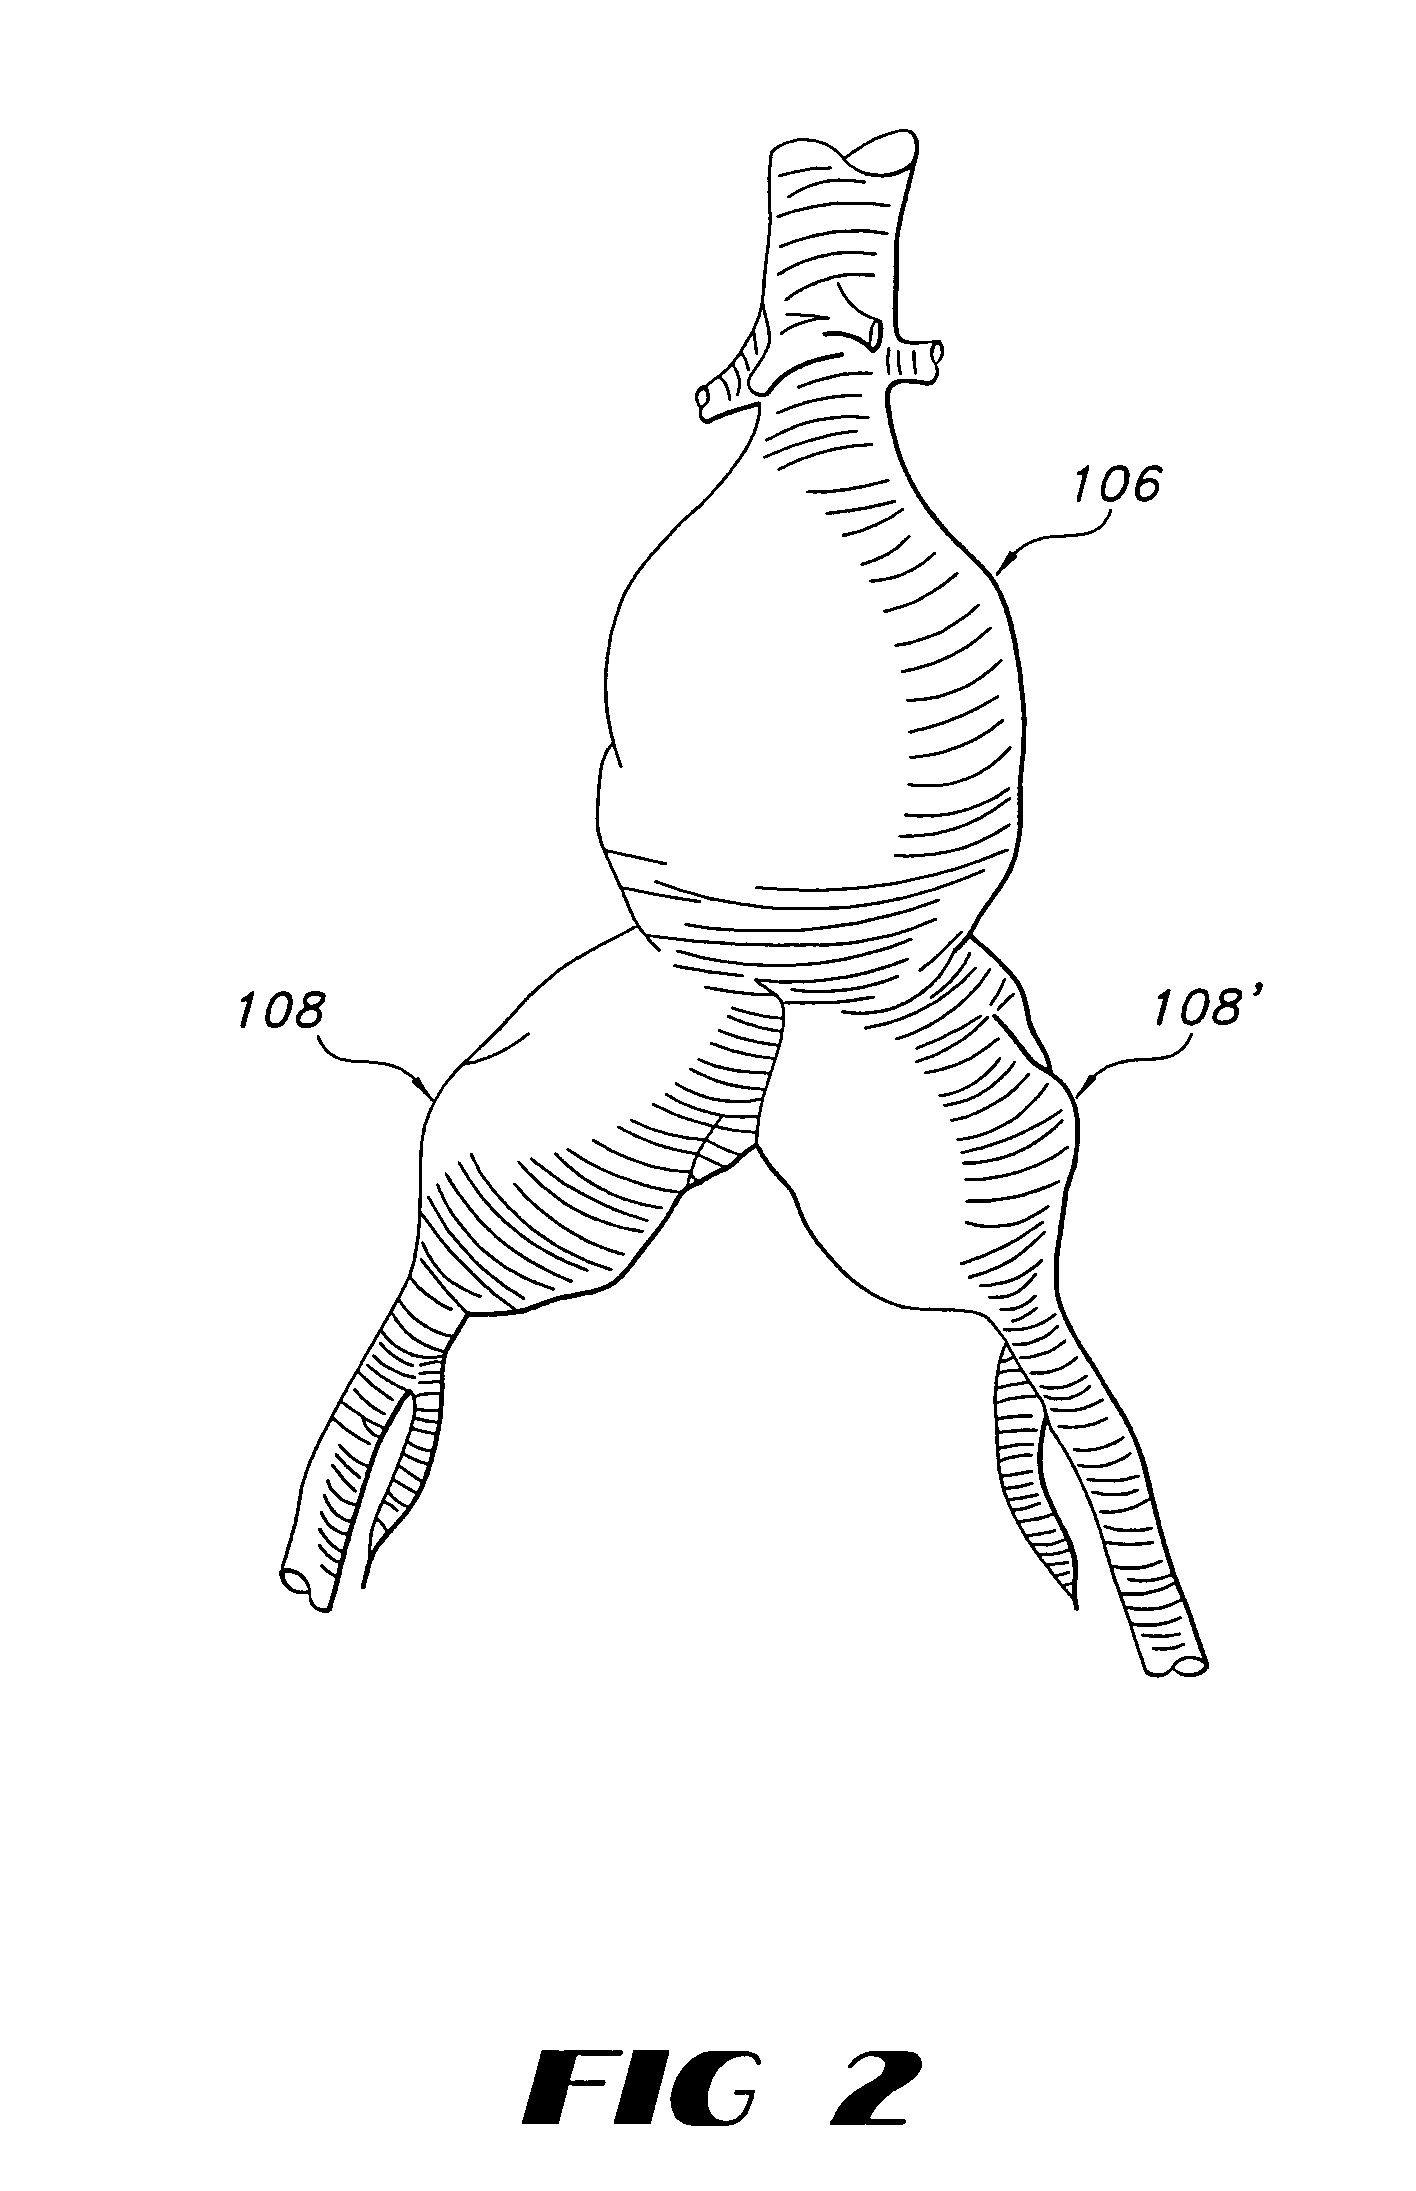 Endovascular prostethic devices having hook and loop structures